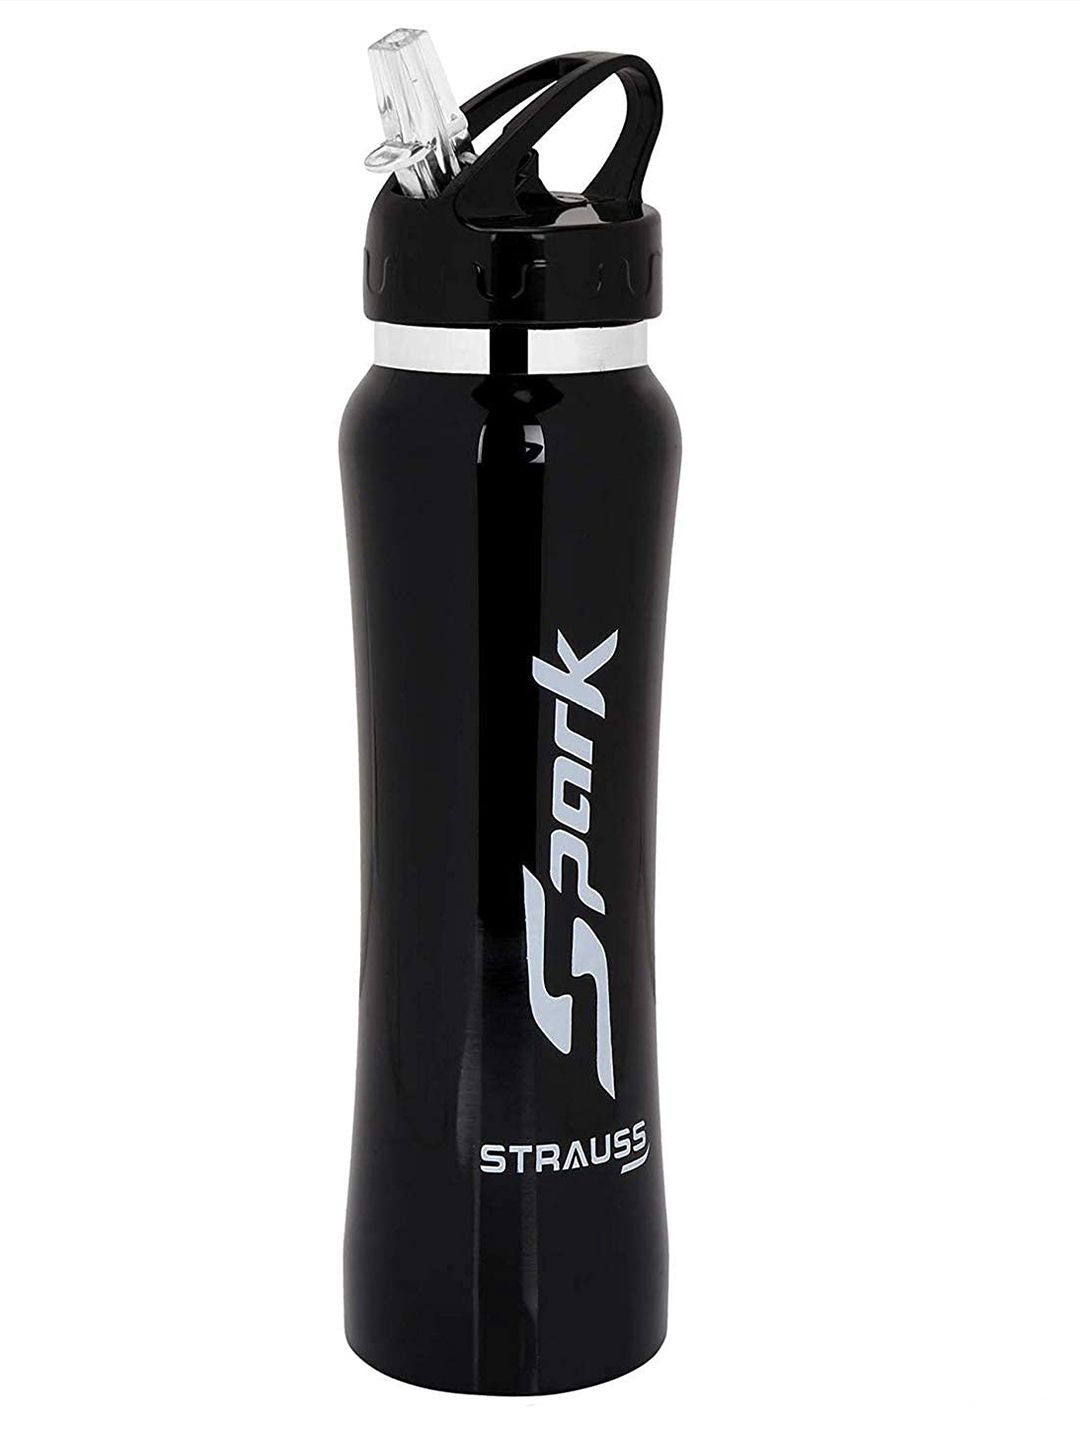 STRAUSS Black & White Solid Metal Finish Stainless-Steel Water Bottle 750 ml Price in India